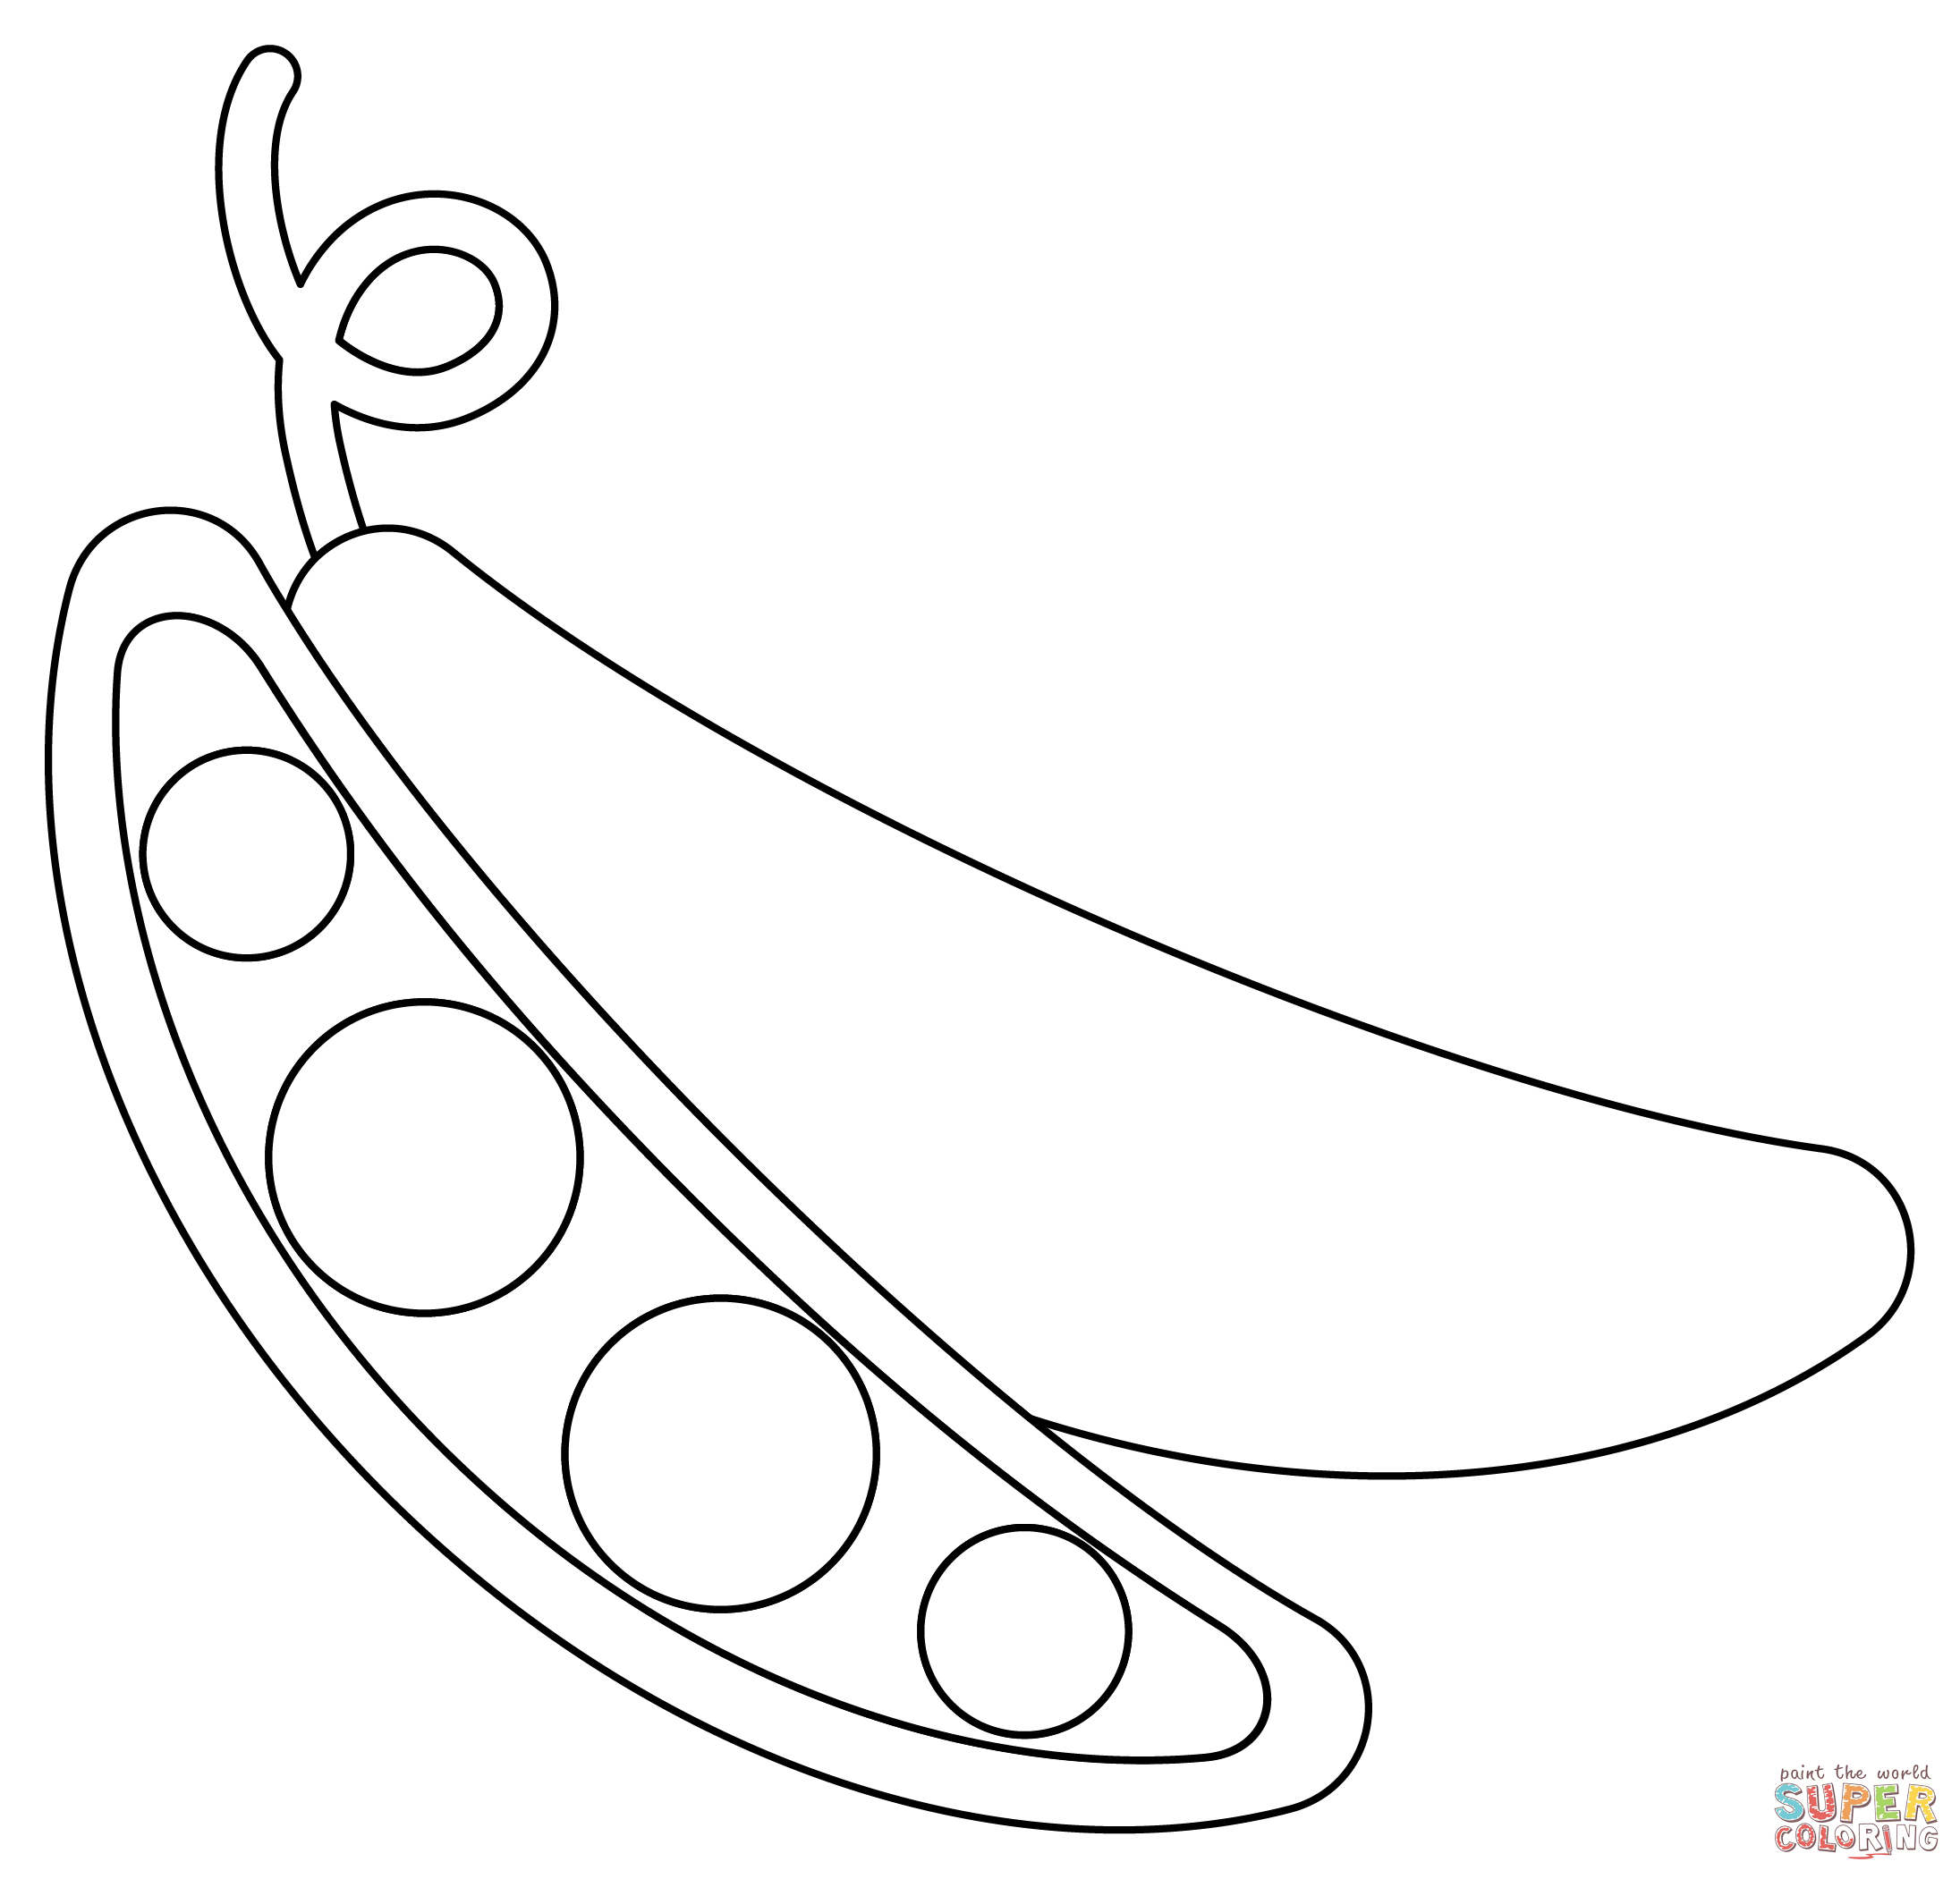 Peas coloring page free printable coloring pages